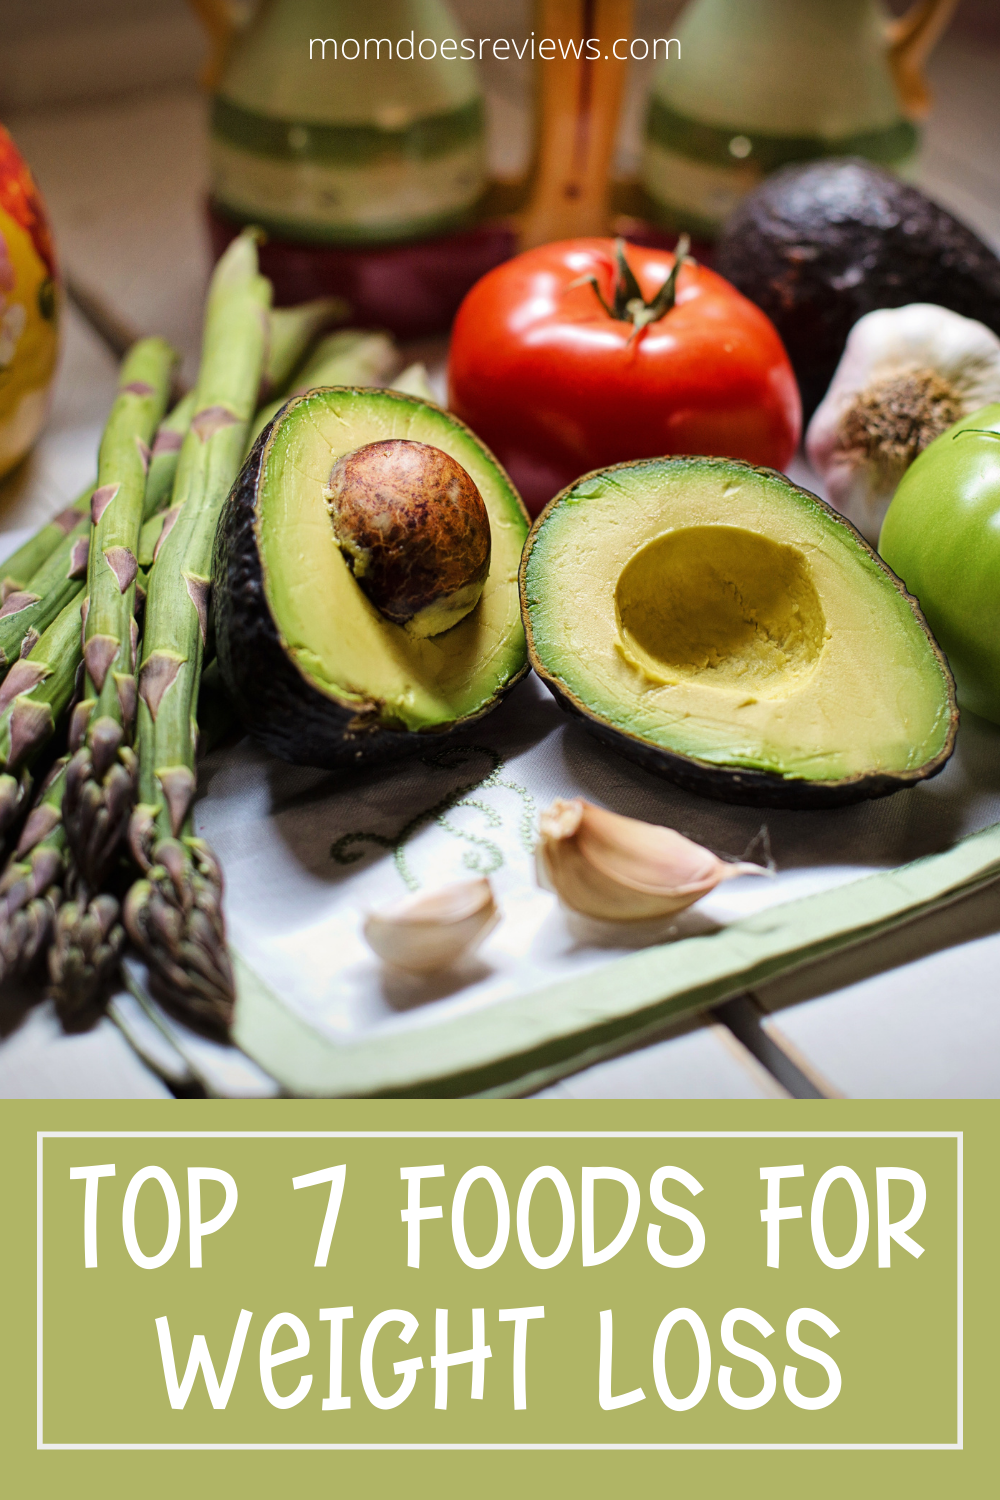 Top 7 Foods That Are Ideal for Weight Loss